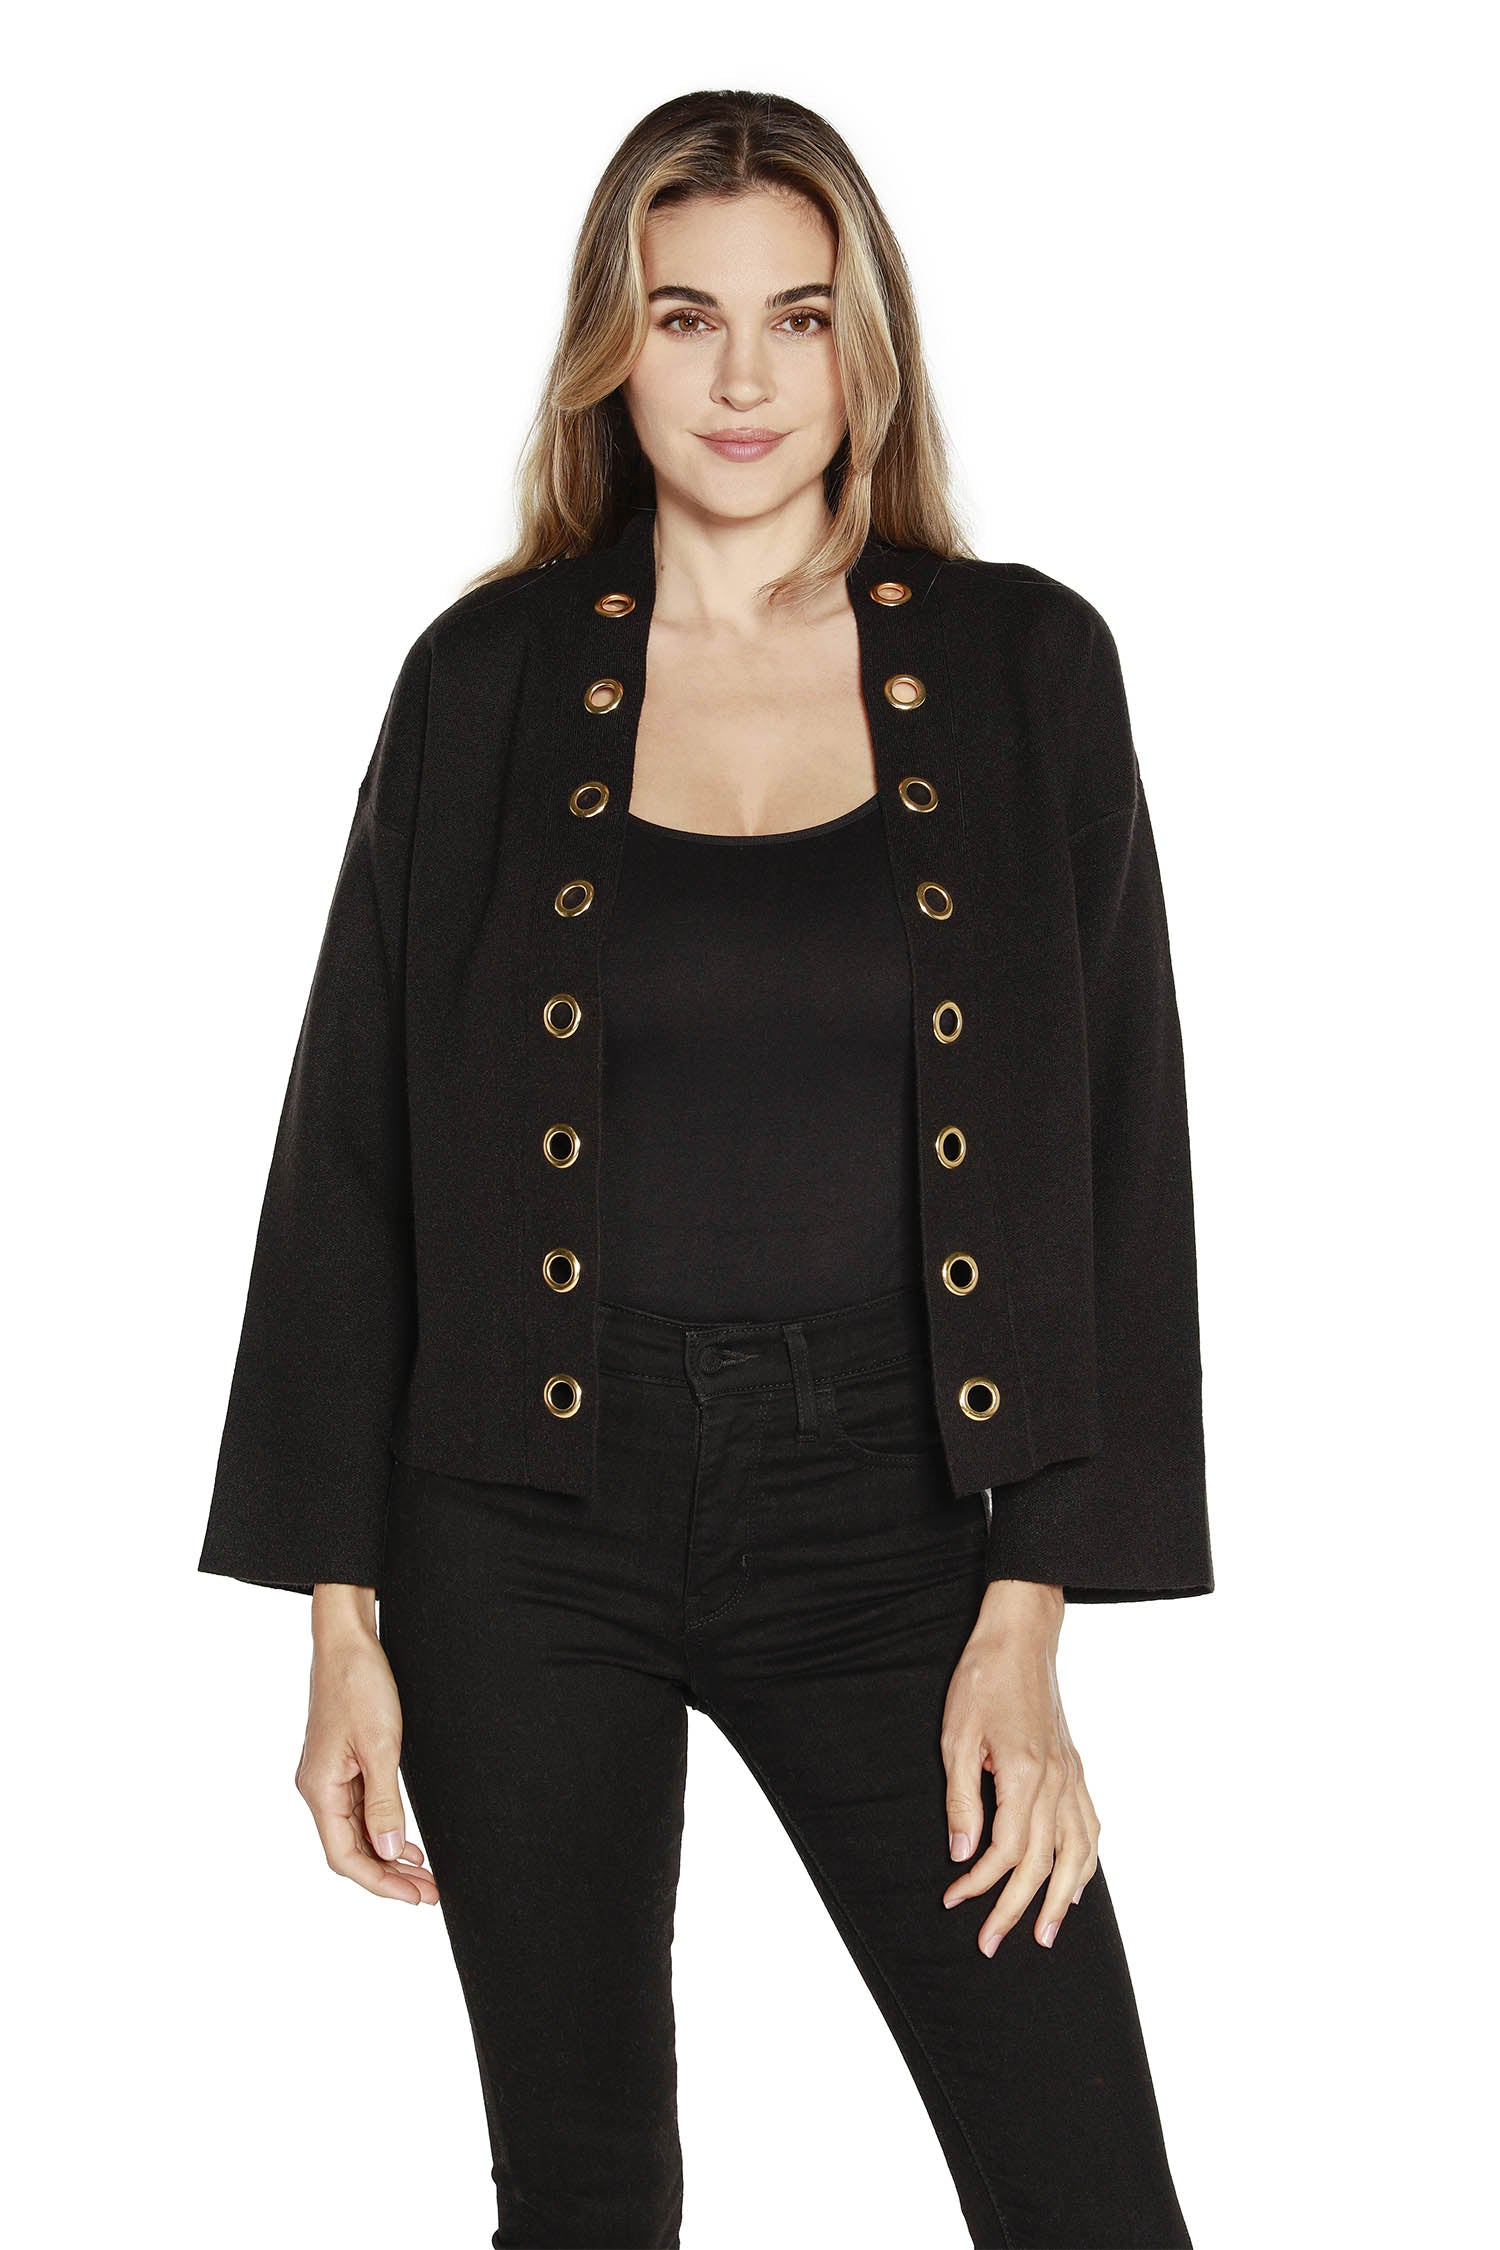 Women's Boxy Cardigan Sweater with Gold Grommet Detail